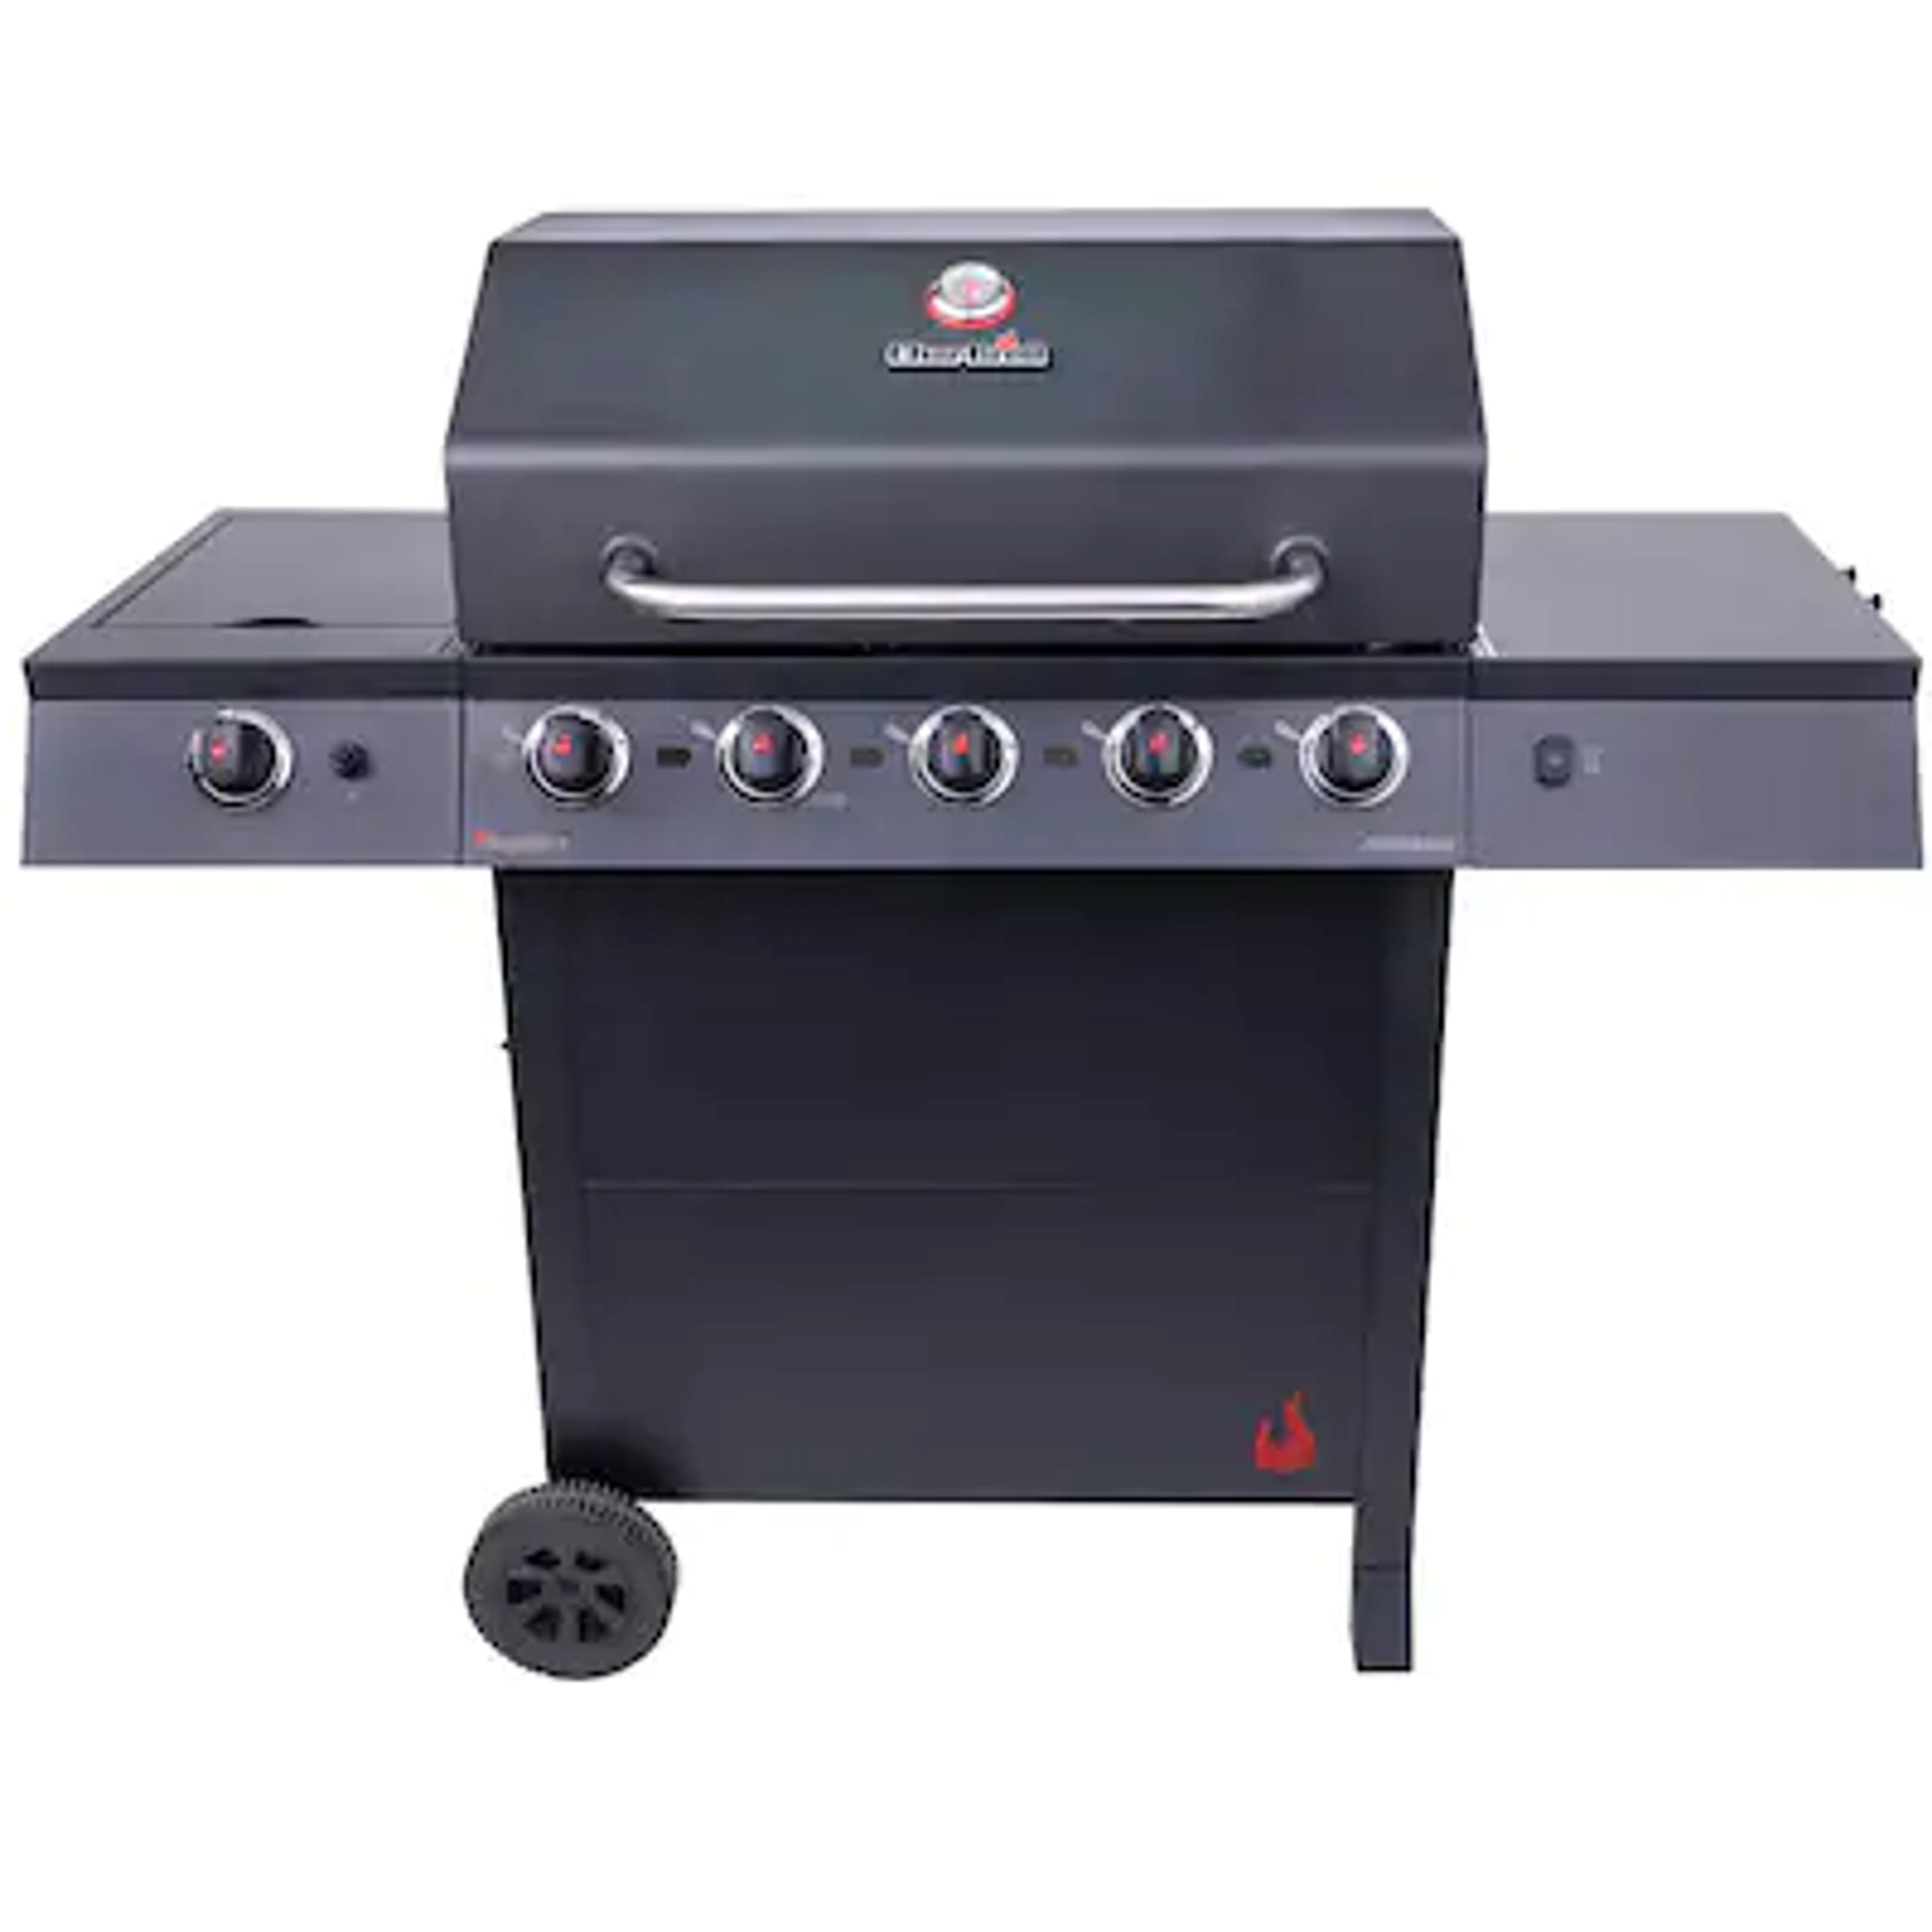 Char-Broil Amplifire Performance Series Stealth Gray 5-Burner Liquid Propane Gas Grill with 1 Side Burner in the Gas Grills department at Lowes.com